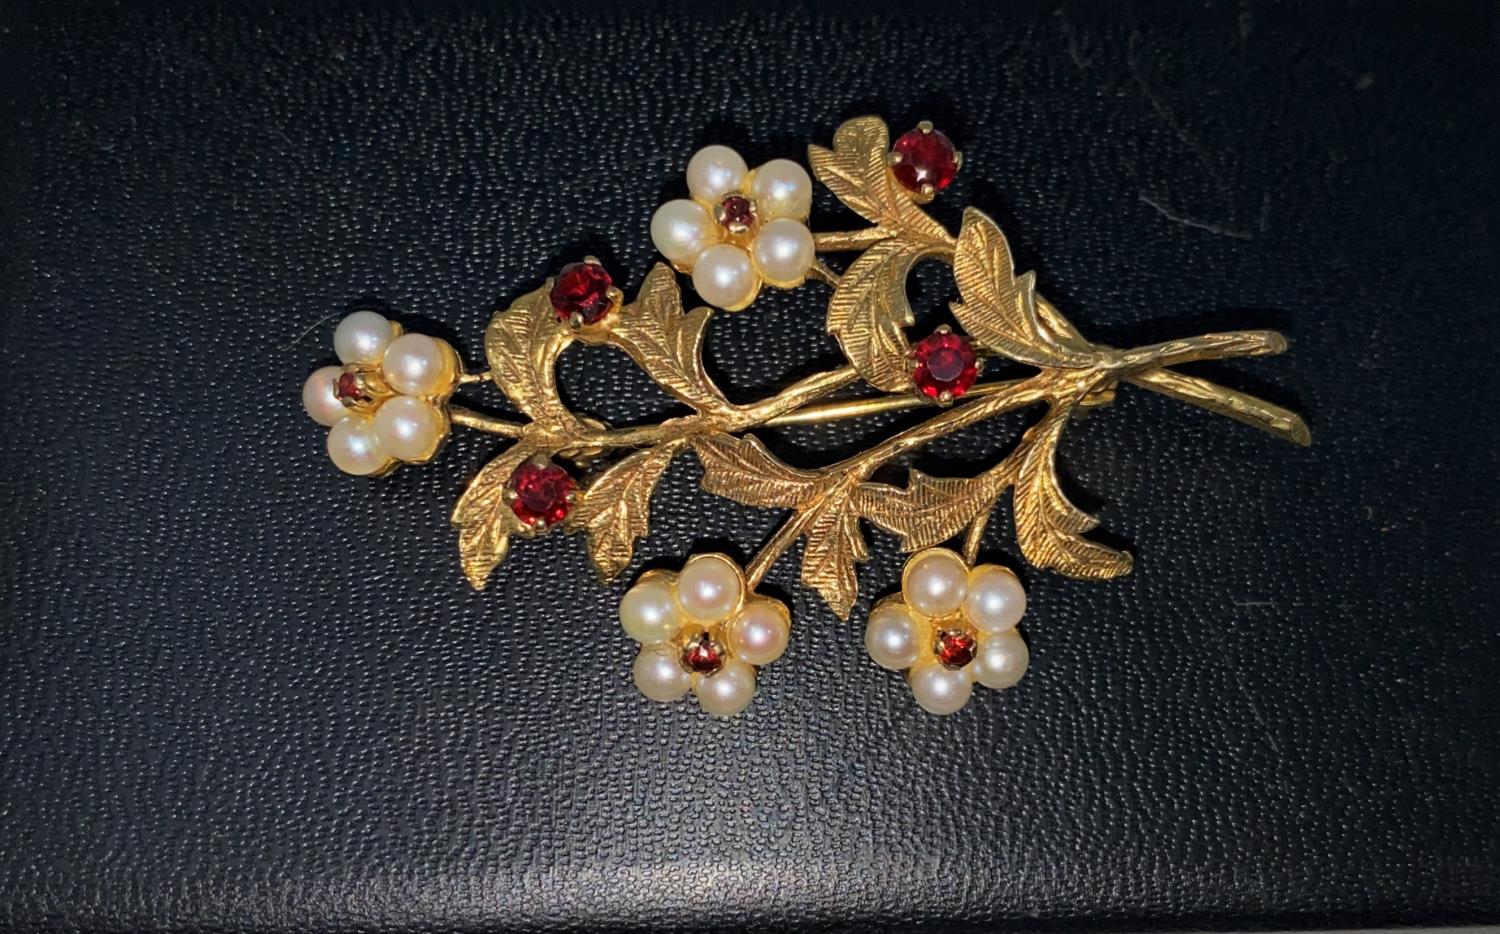 A 9 carat hallmarked gold brooch, floral spray with 4 flowerheads set seed pearls and garnets, the - Image 2 of 2